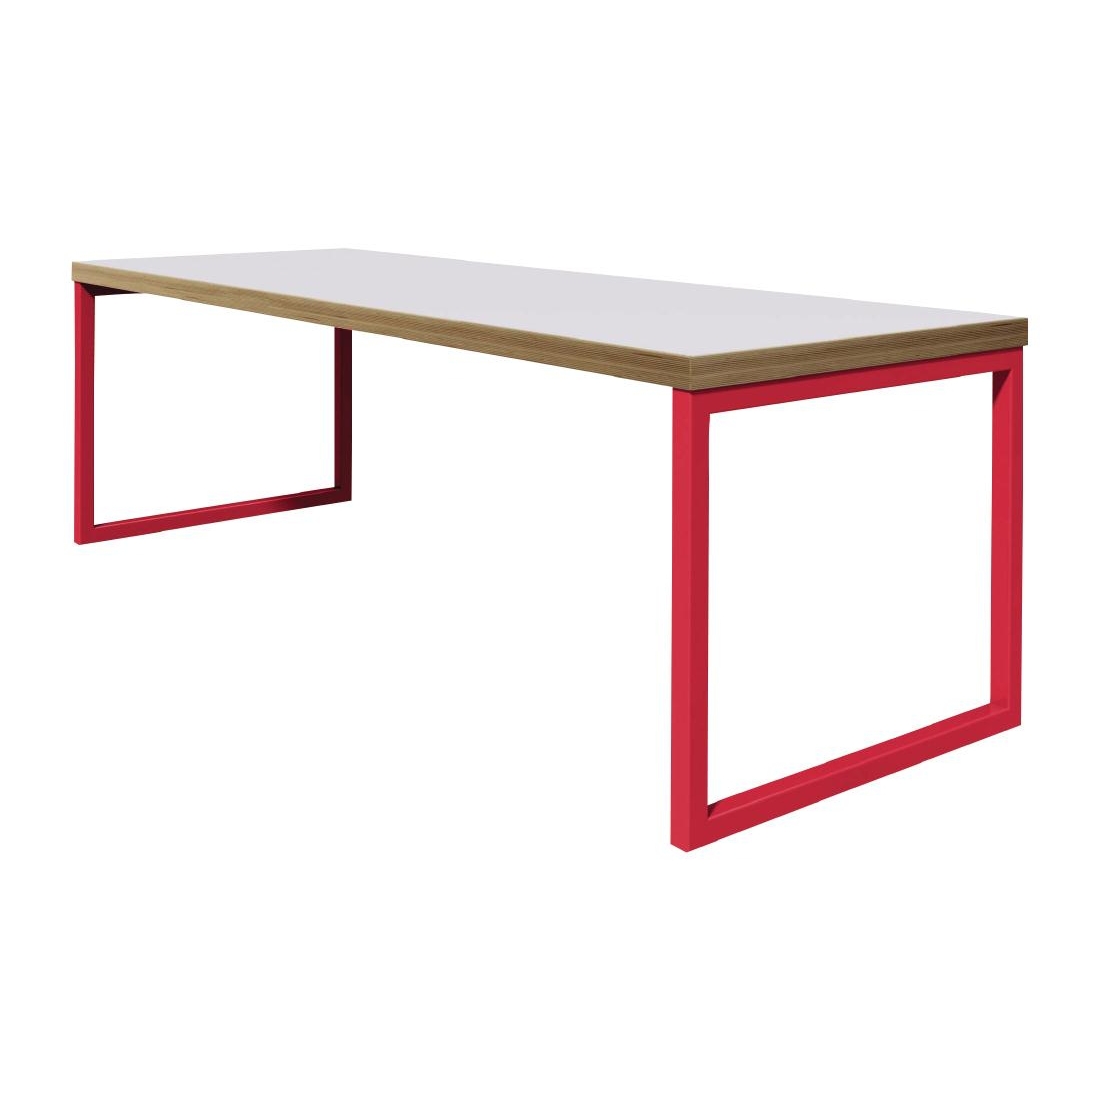 Bolero Dining Table White with Red Frame 7ft